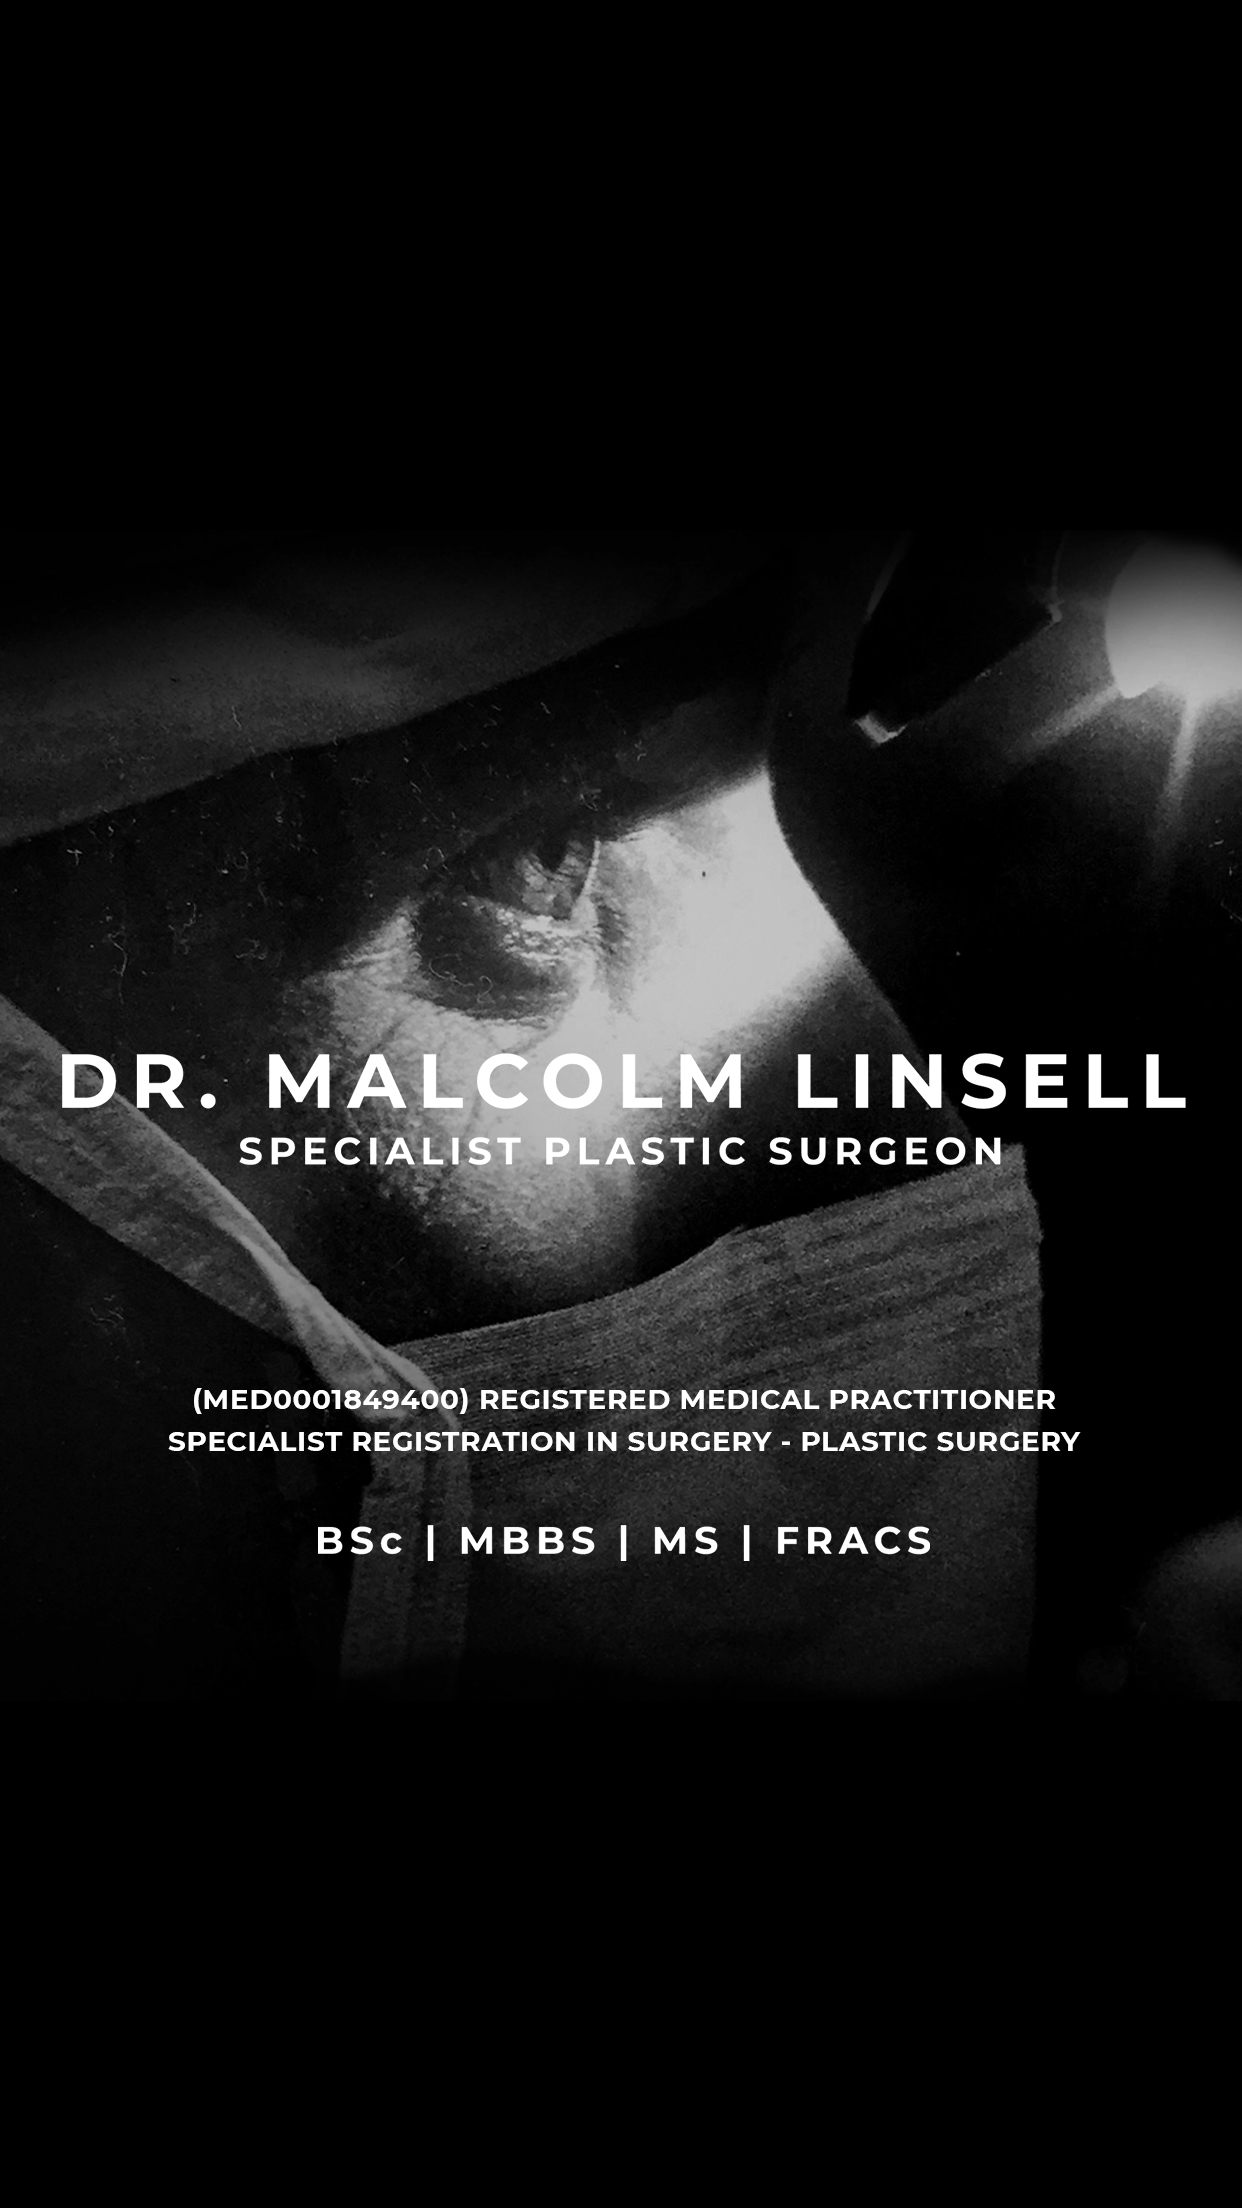 Malcolm linsell mob homepage with message